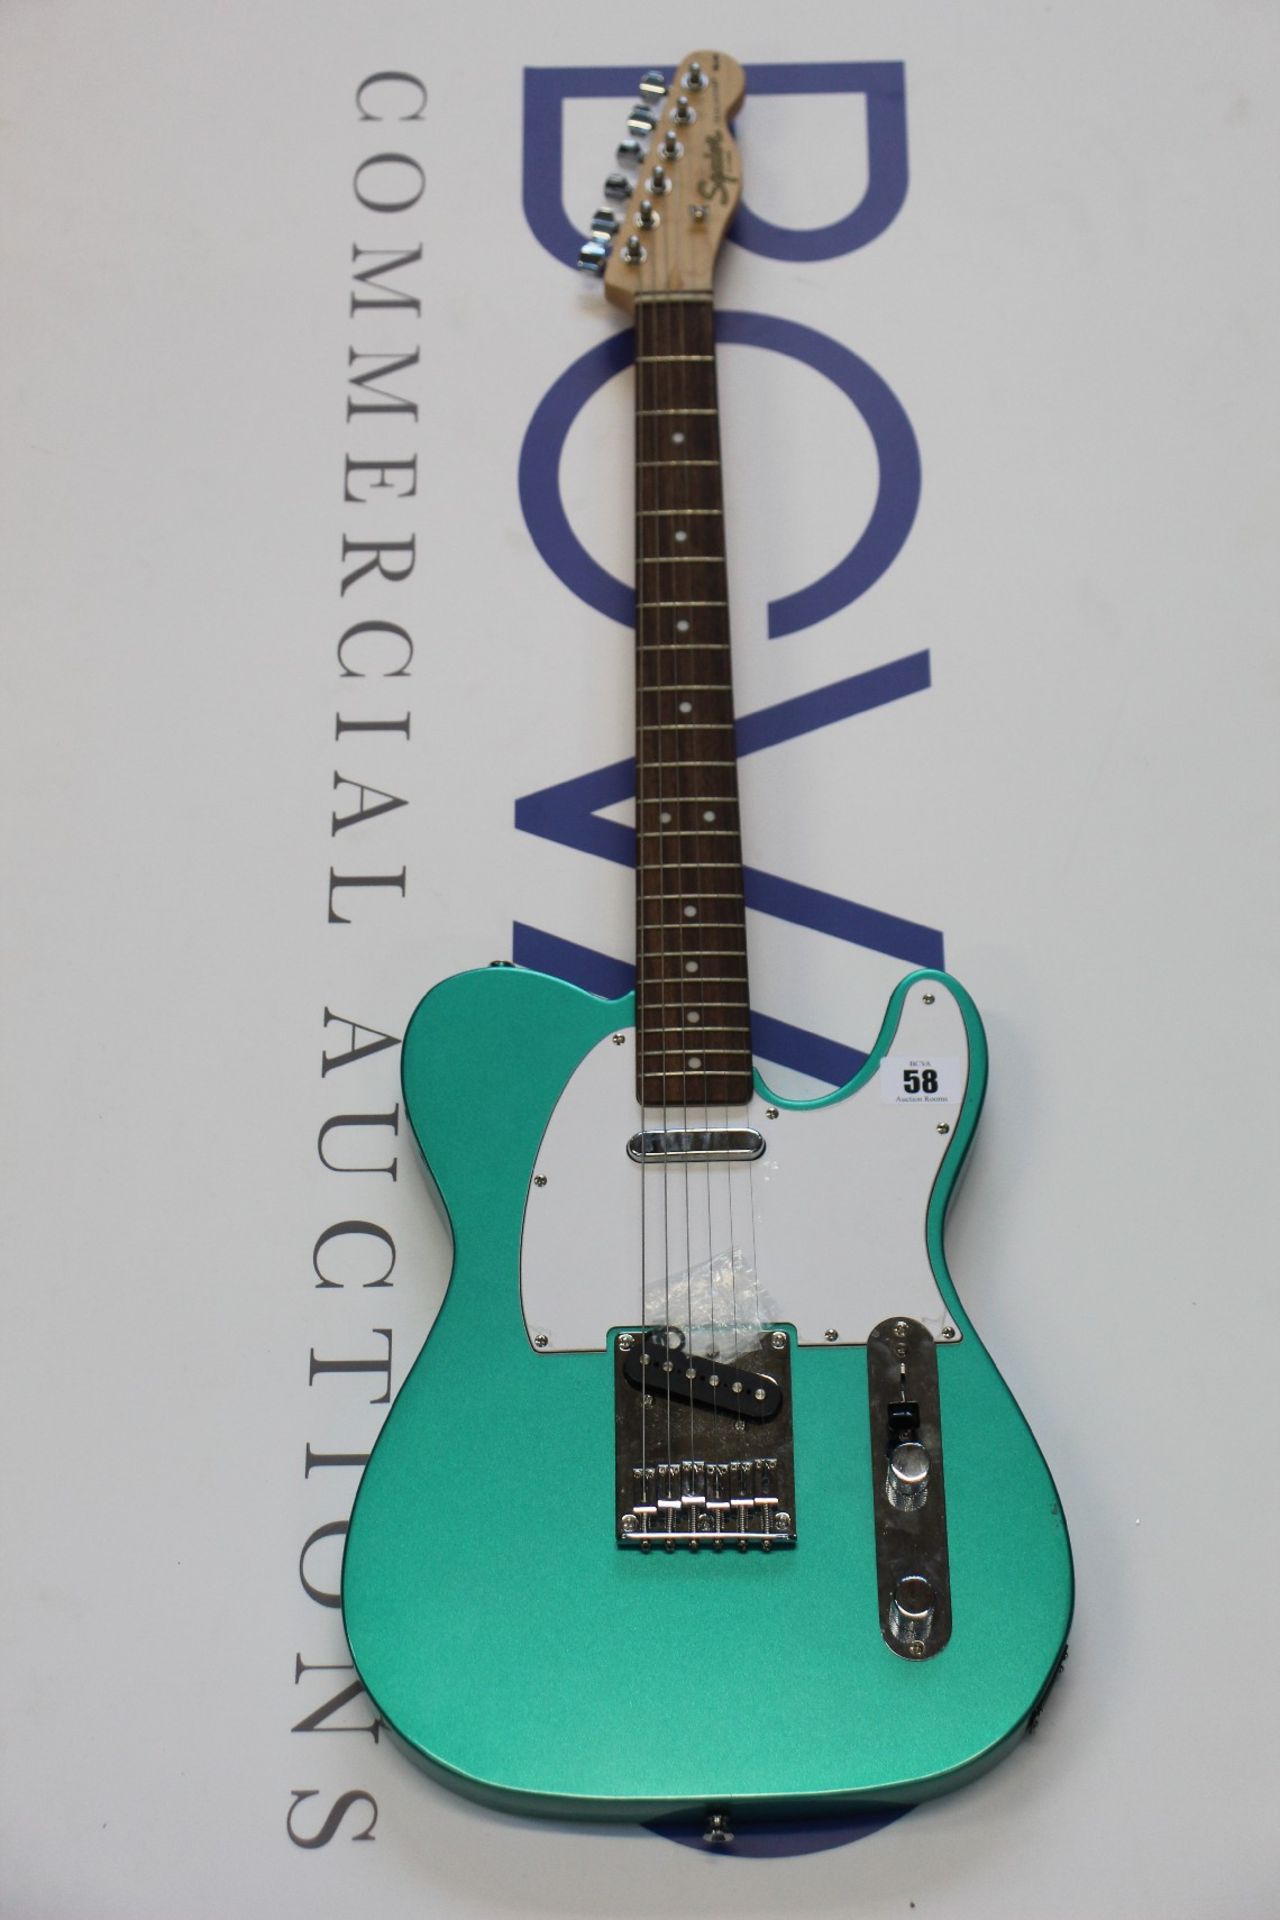 A pre-owned Squire Affinity Telecaster in Race Green (Guitar has some minor problems, Viewing